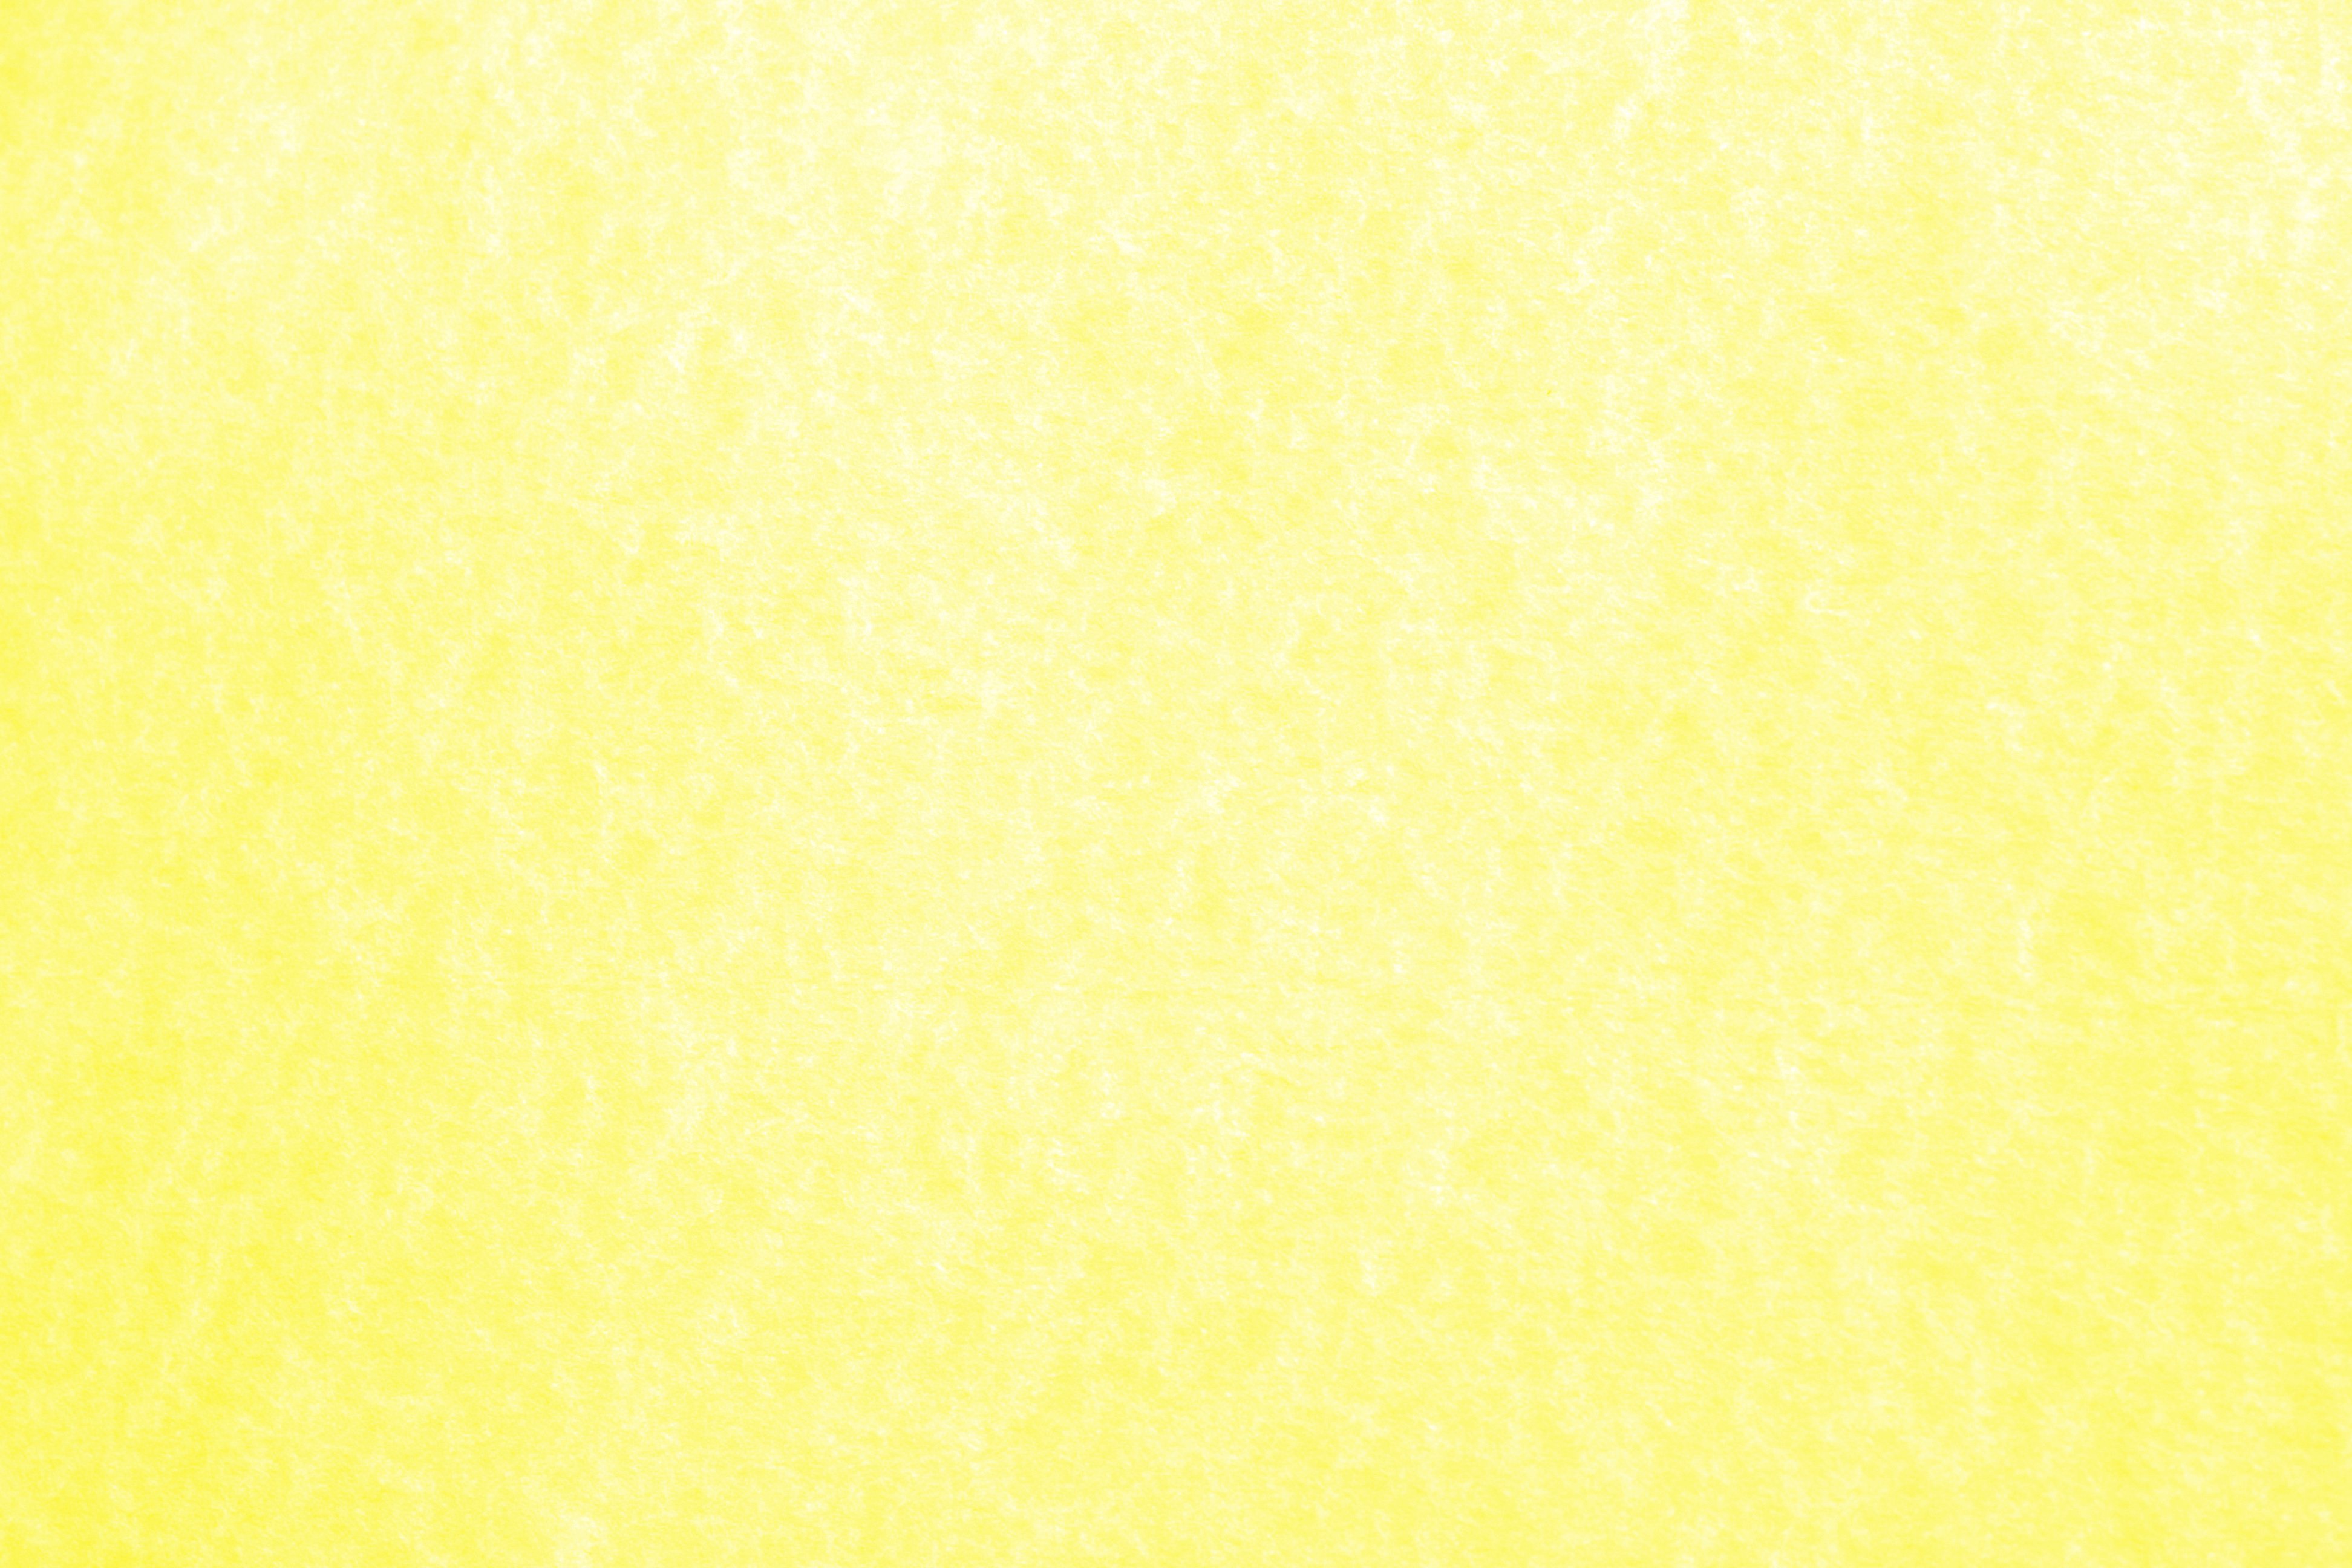 Free Download Yellow Parchment Paper Texture Picture Free Photograph